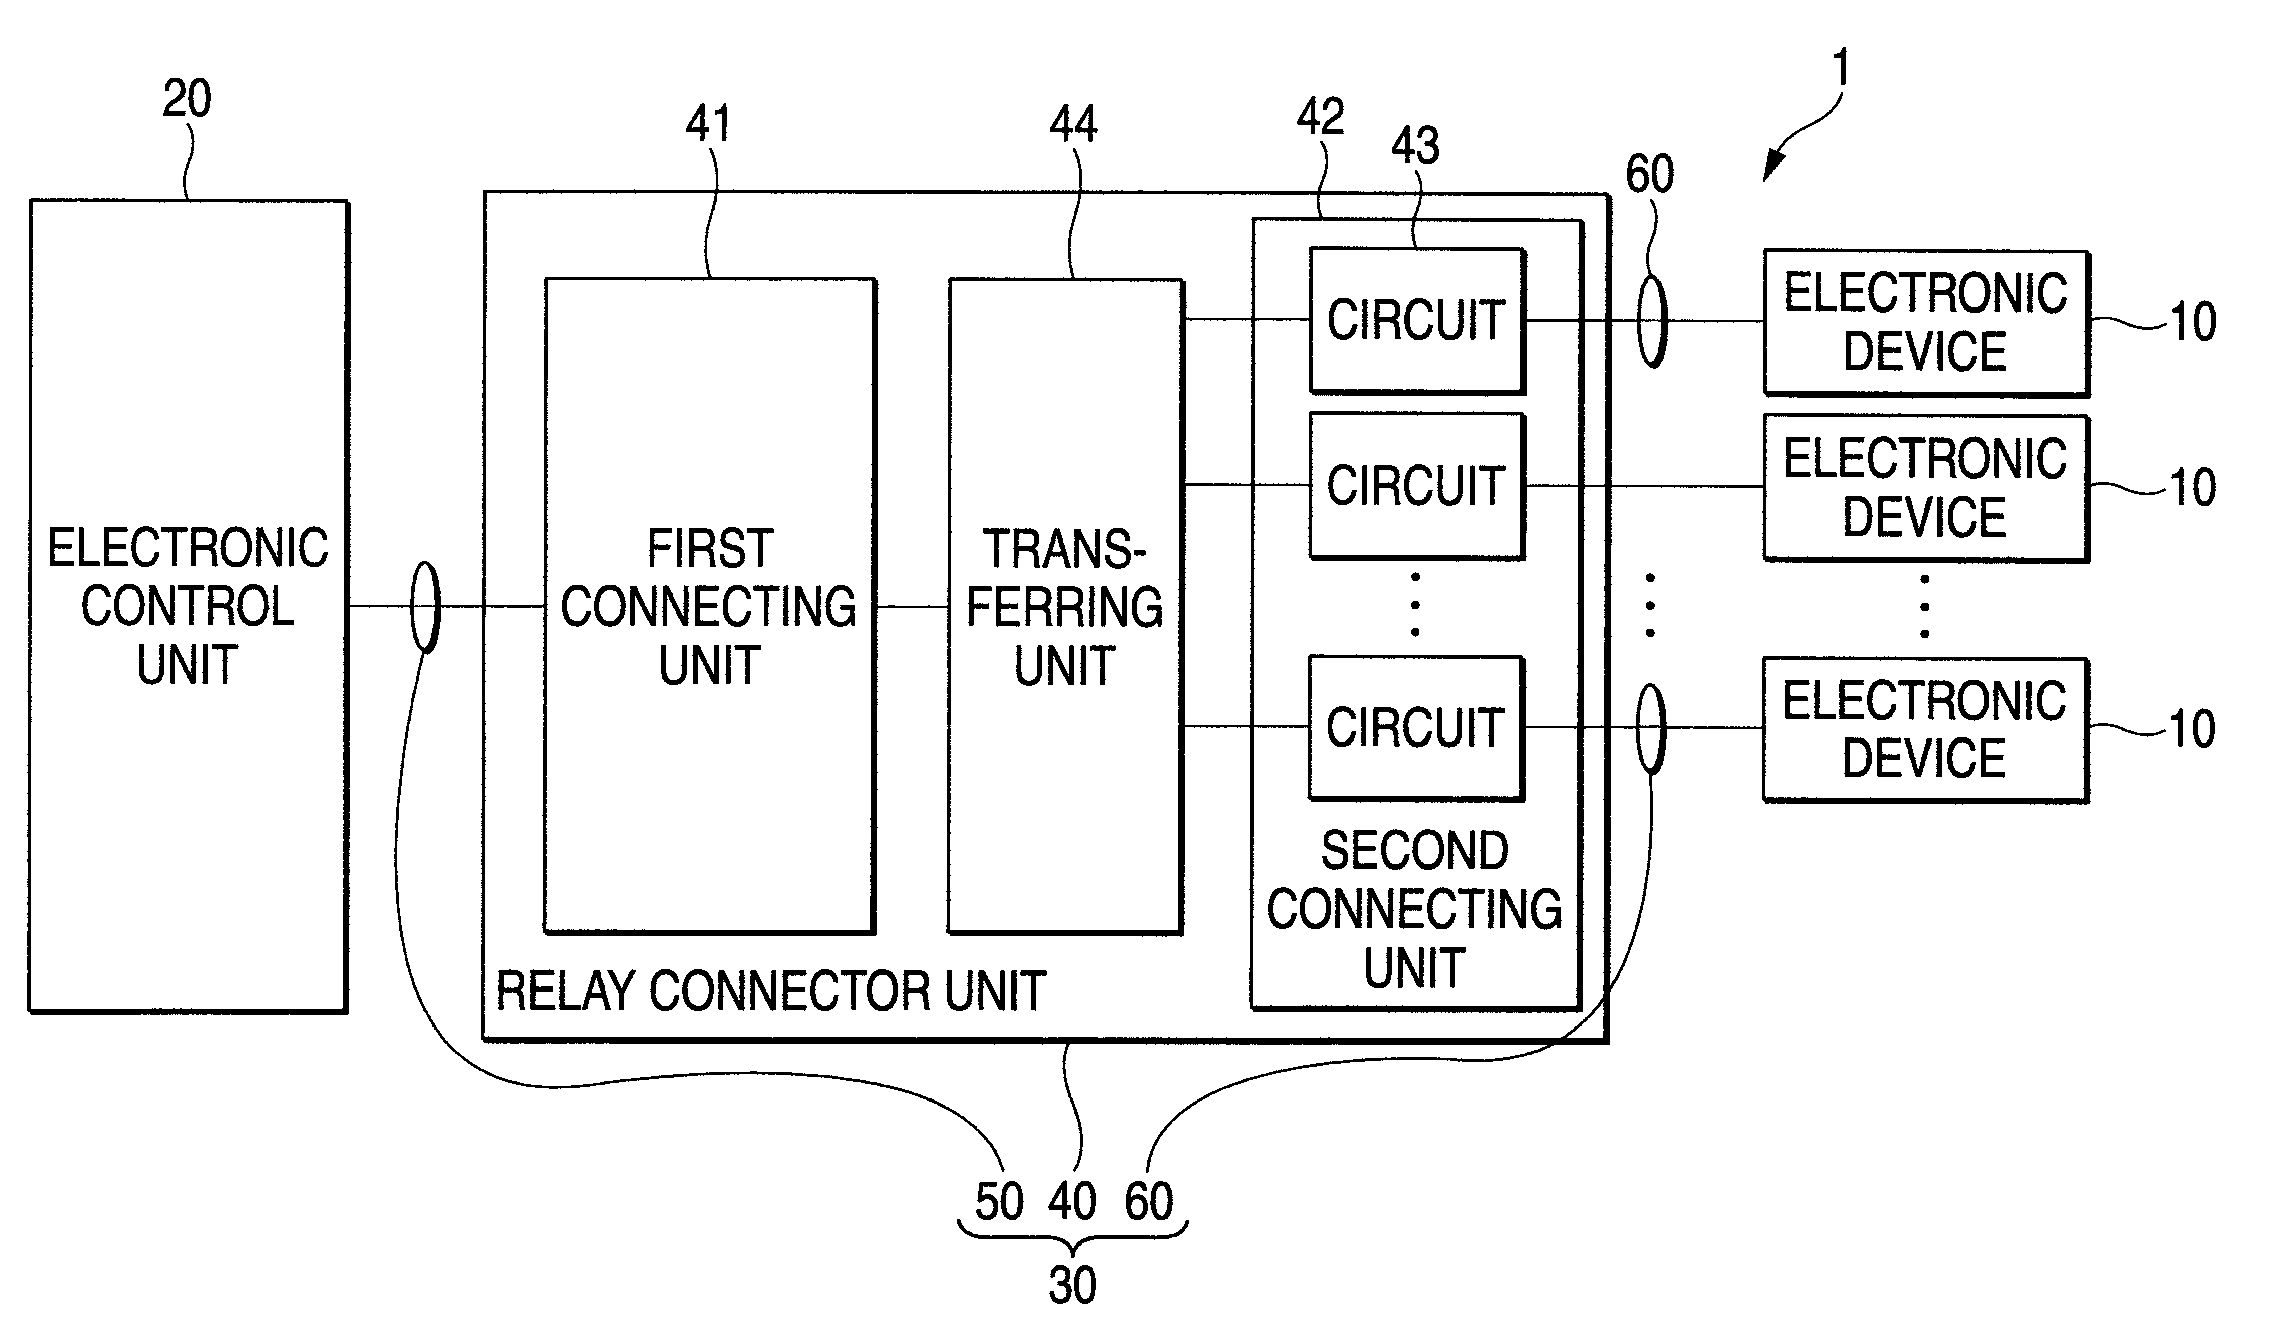 Relay connector unit and electronic device control system